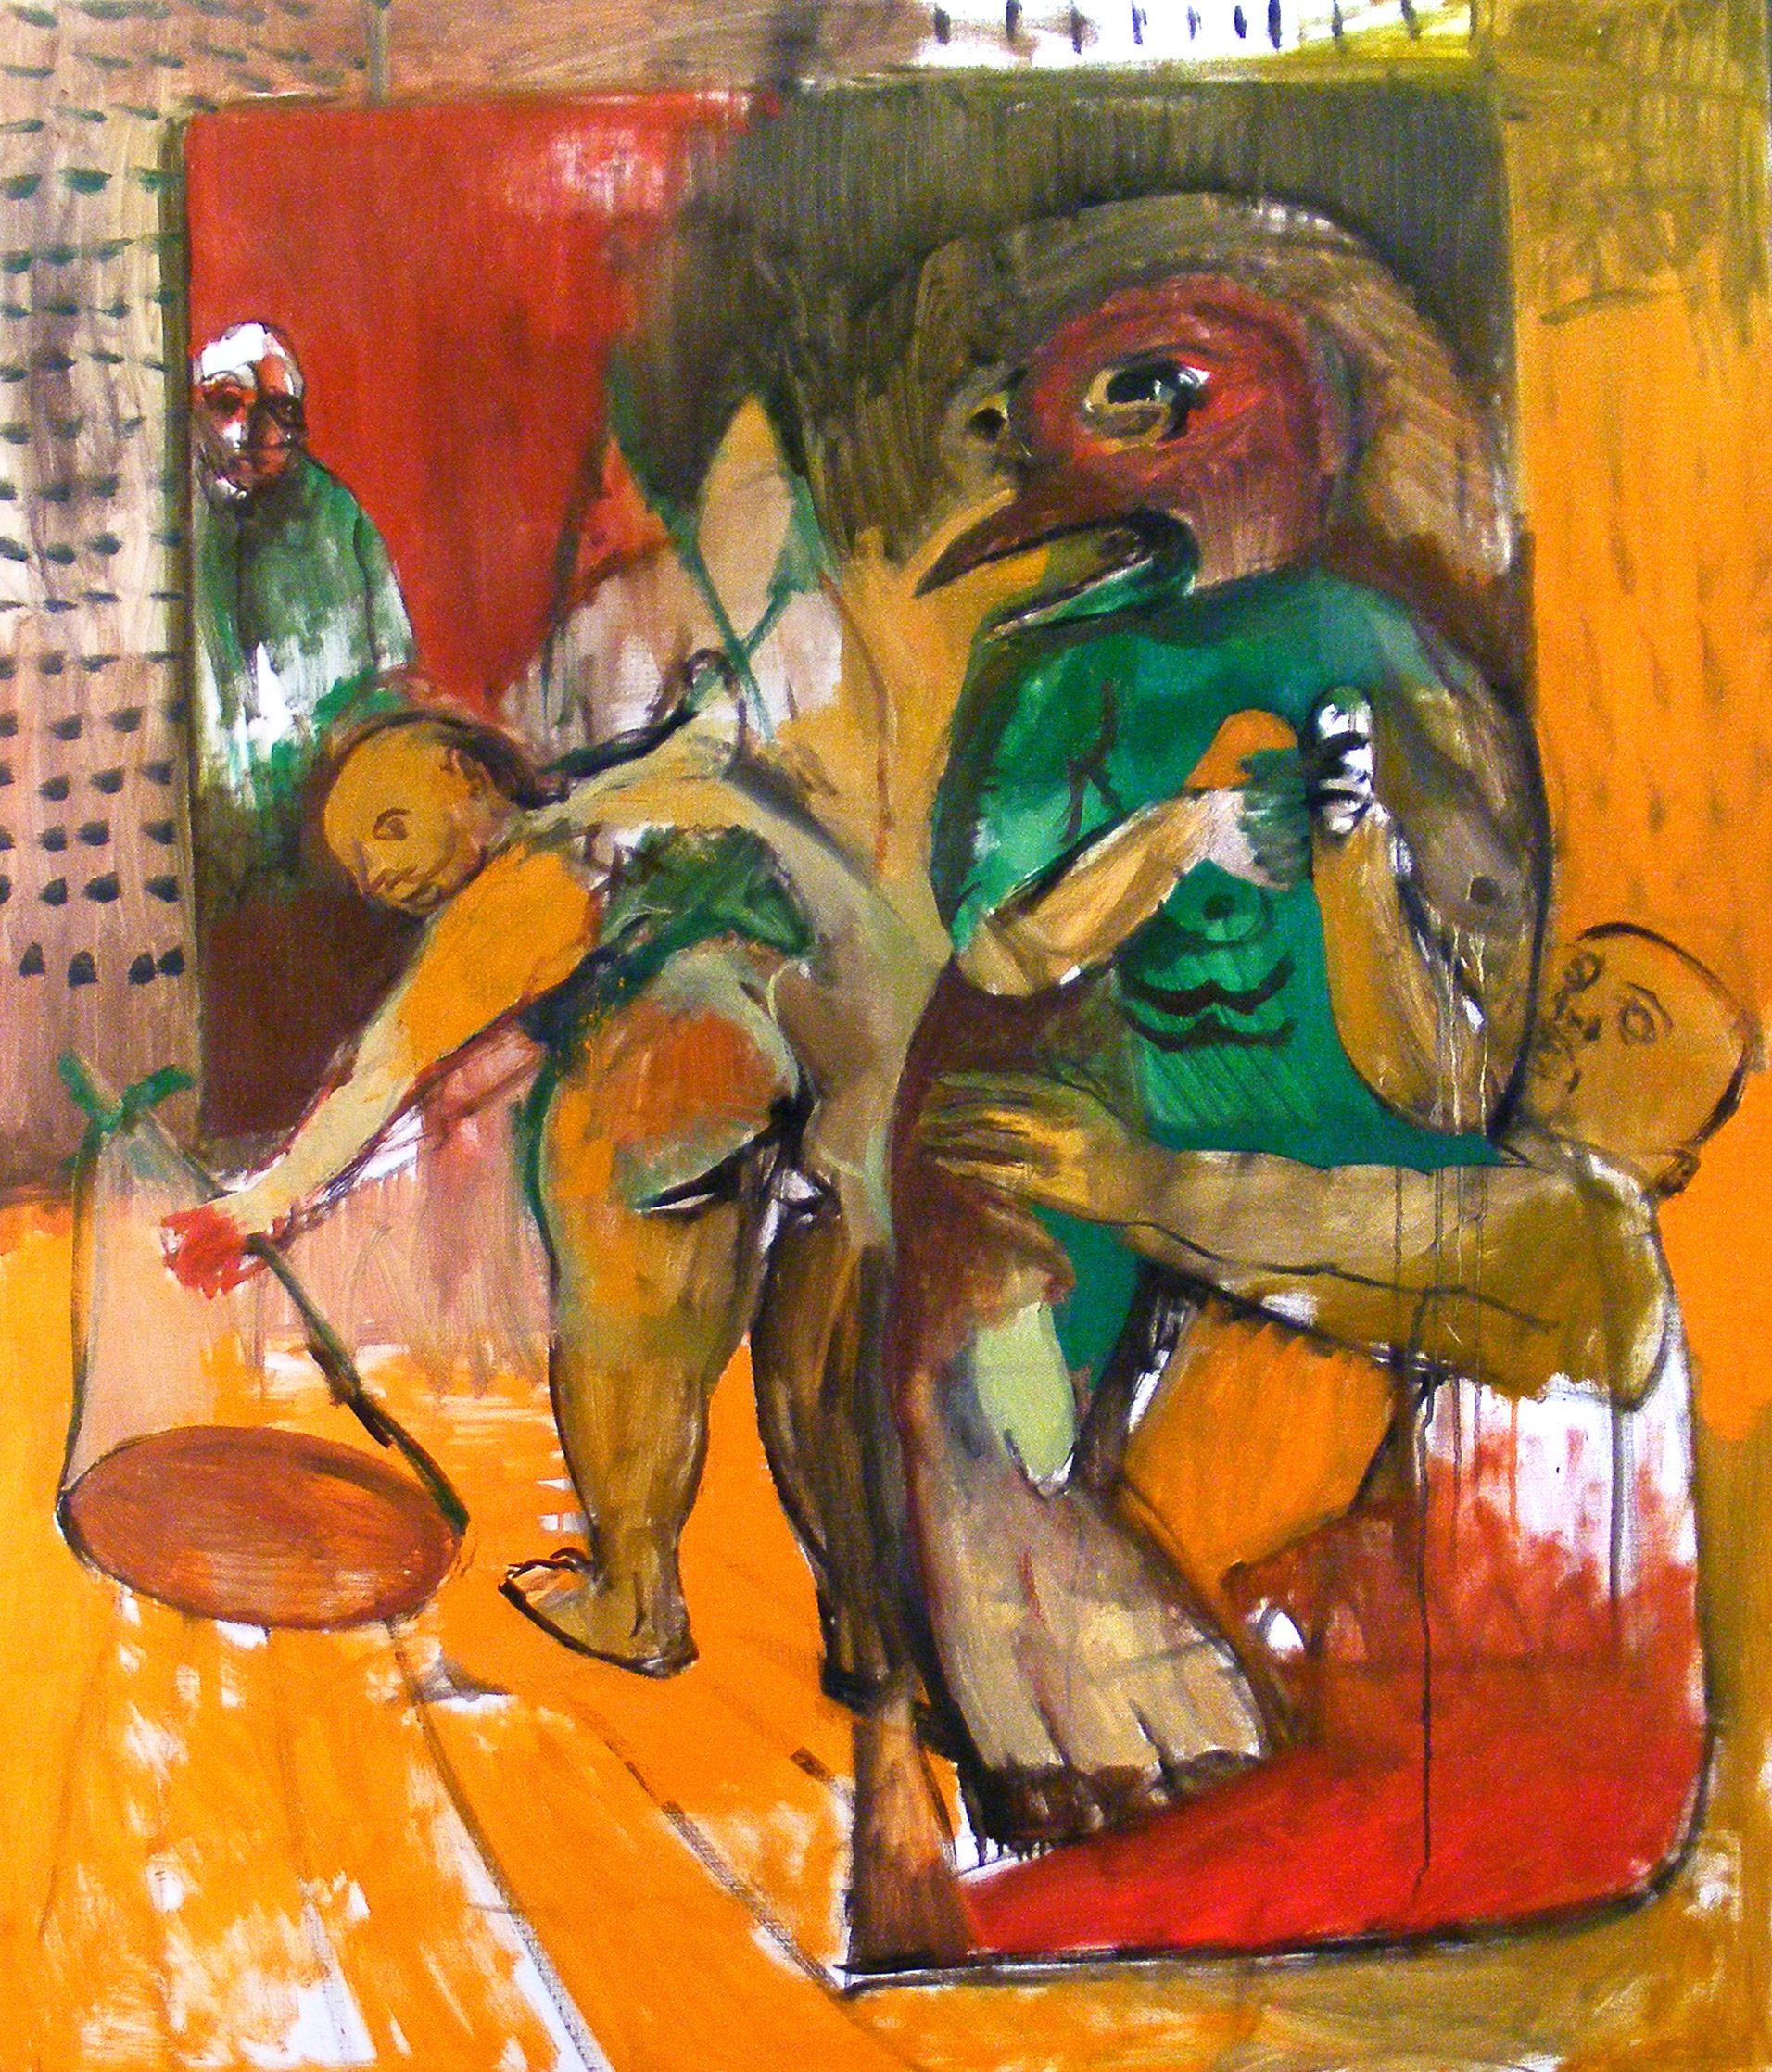    "Untitled" 2009   Oil on canvas 